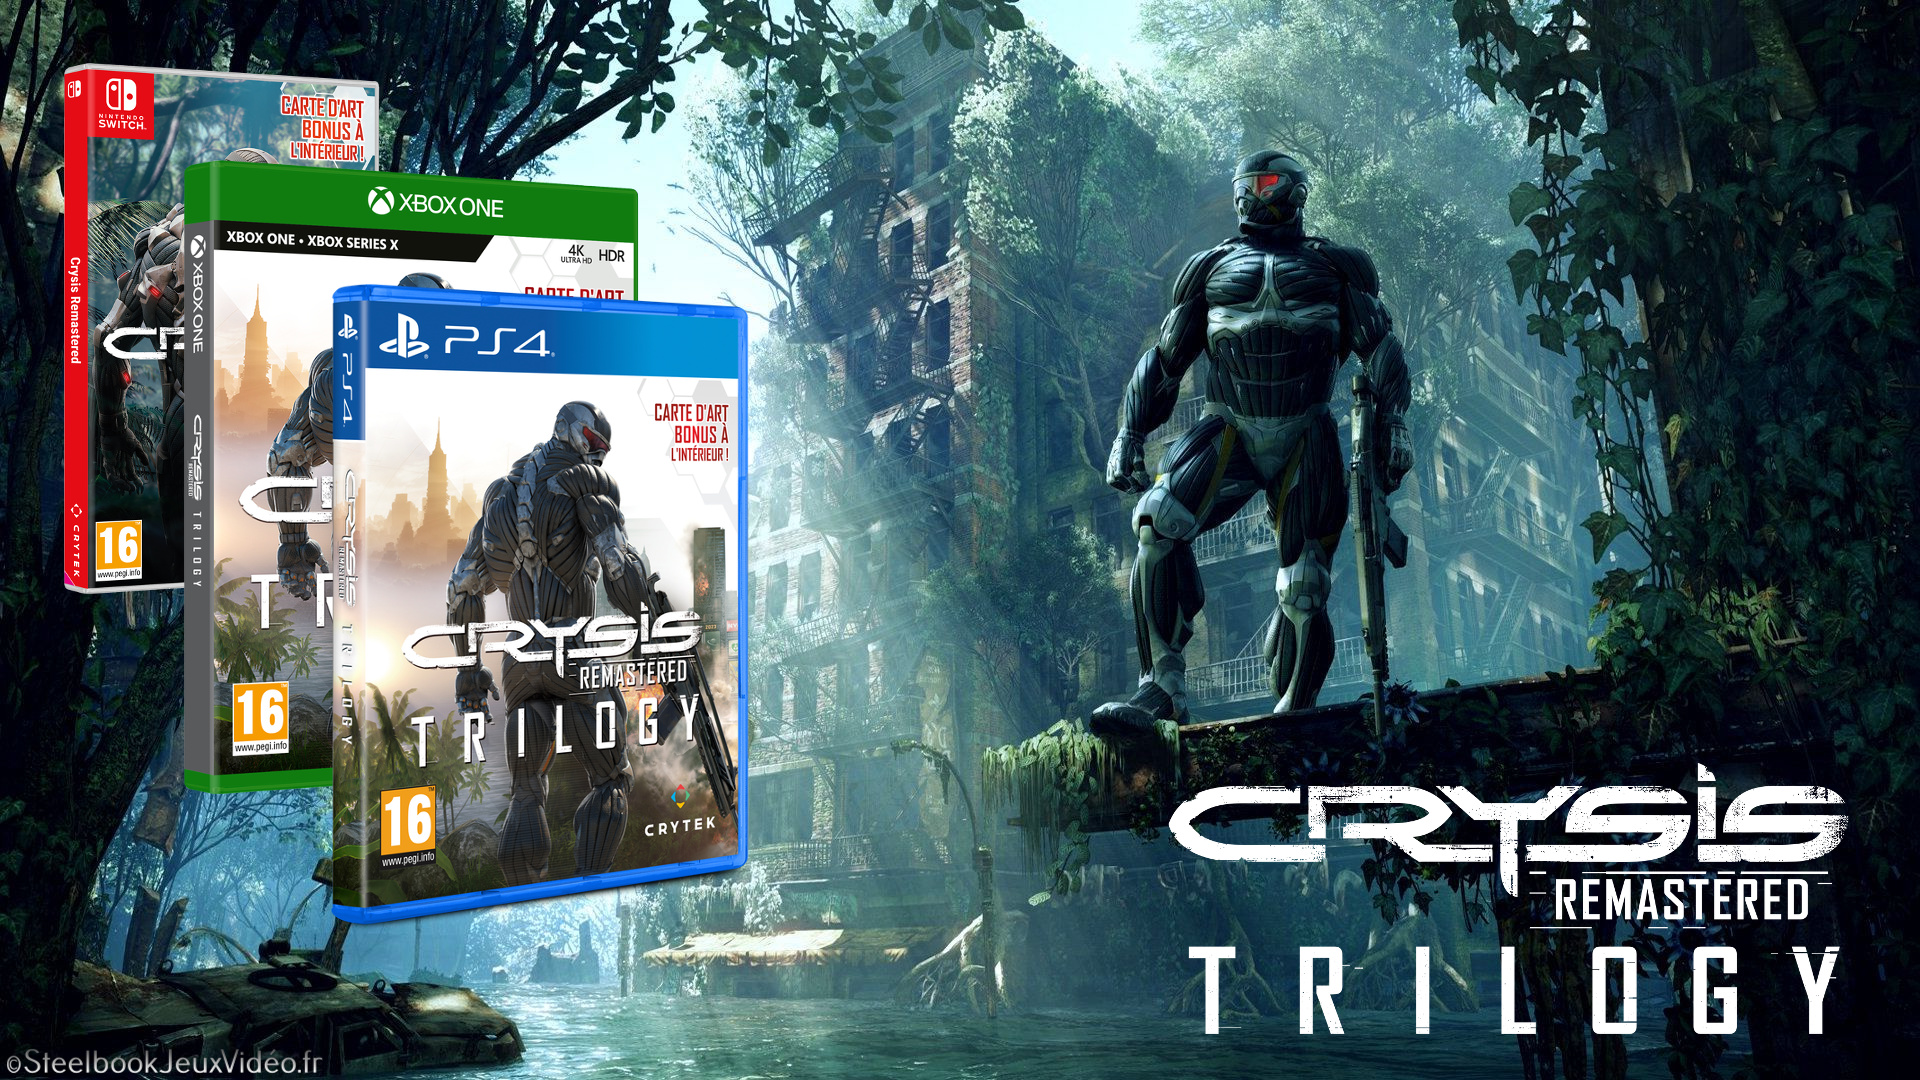 crysis remastered trilogy xbox